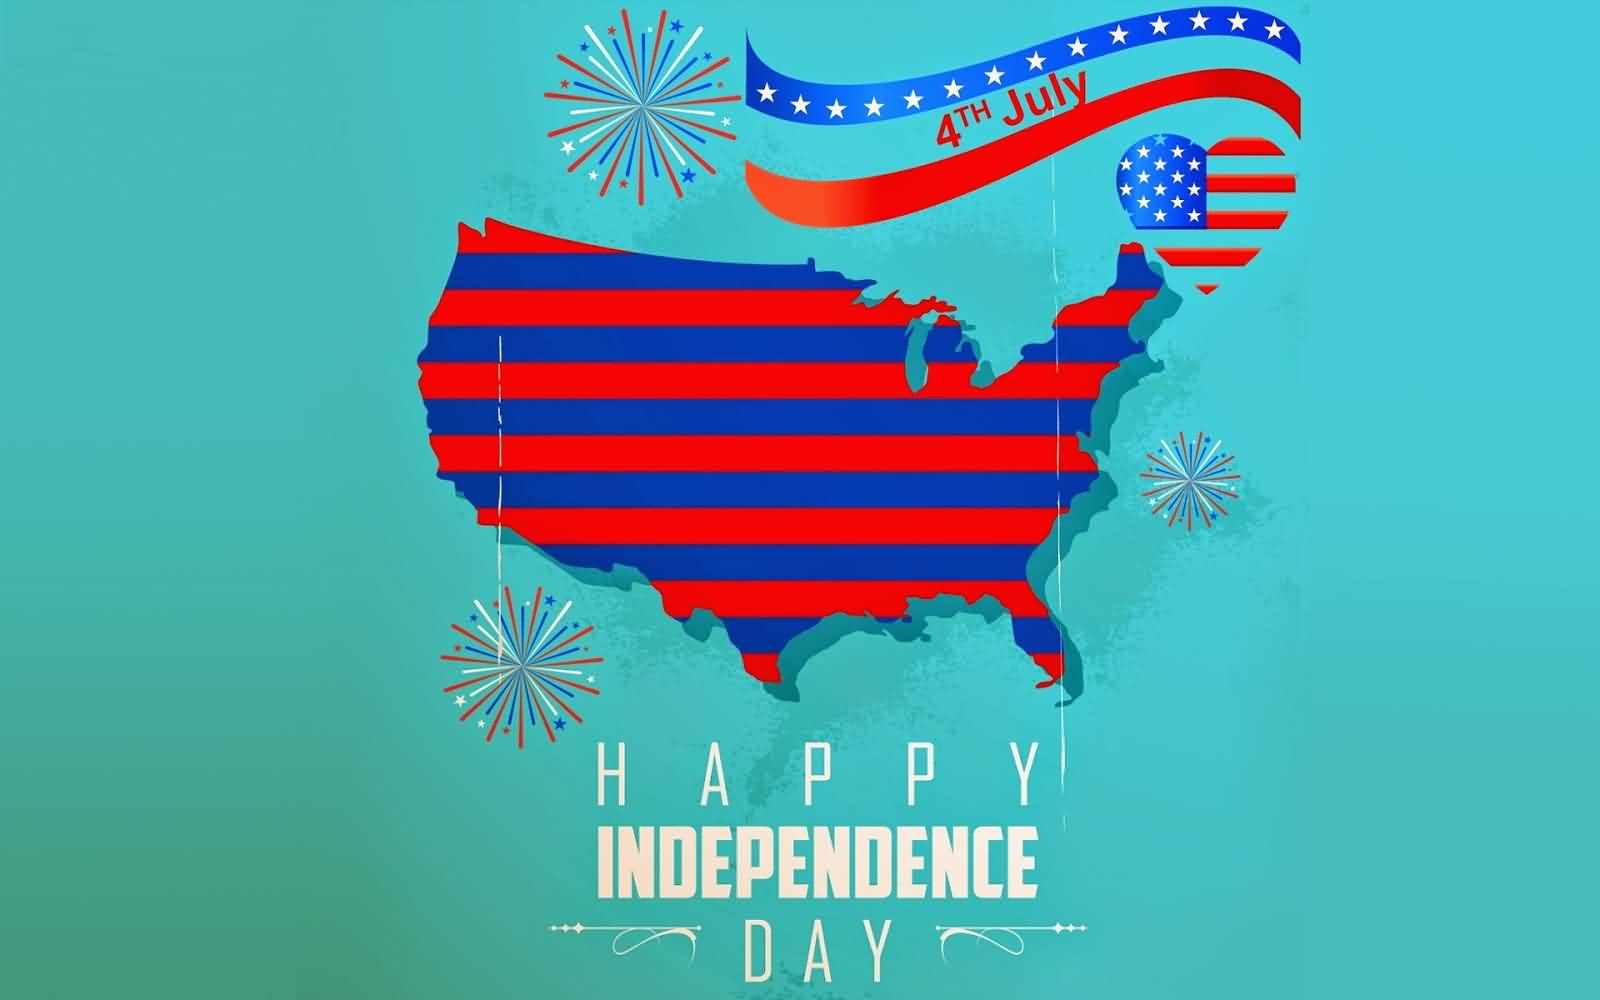 Beautiful 4th July Happy Independence Day Greetings Card Image